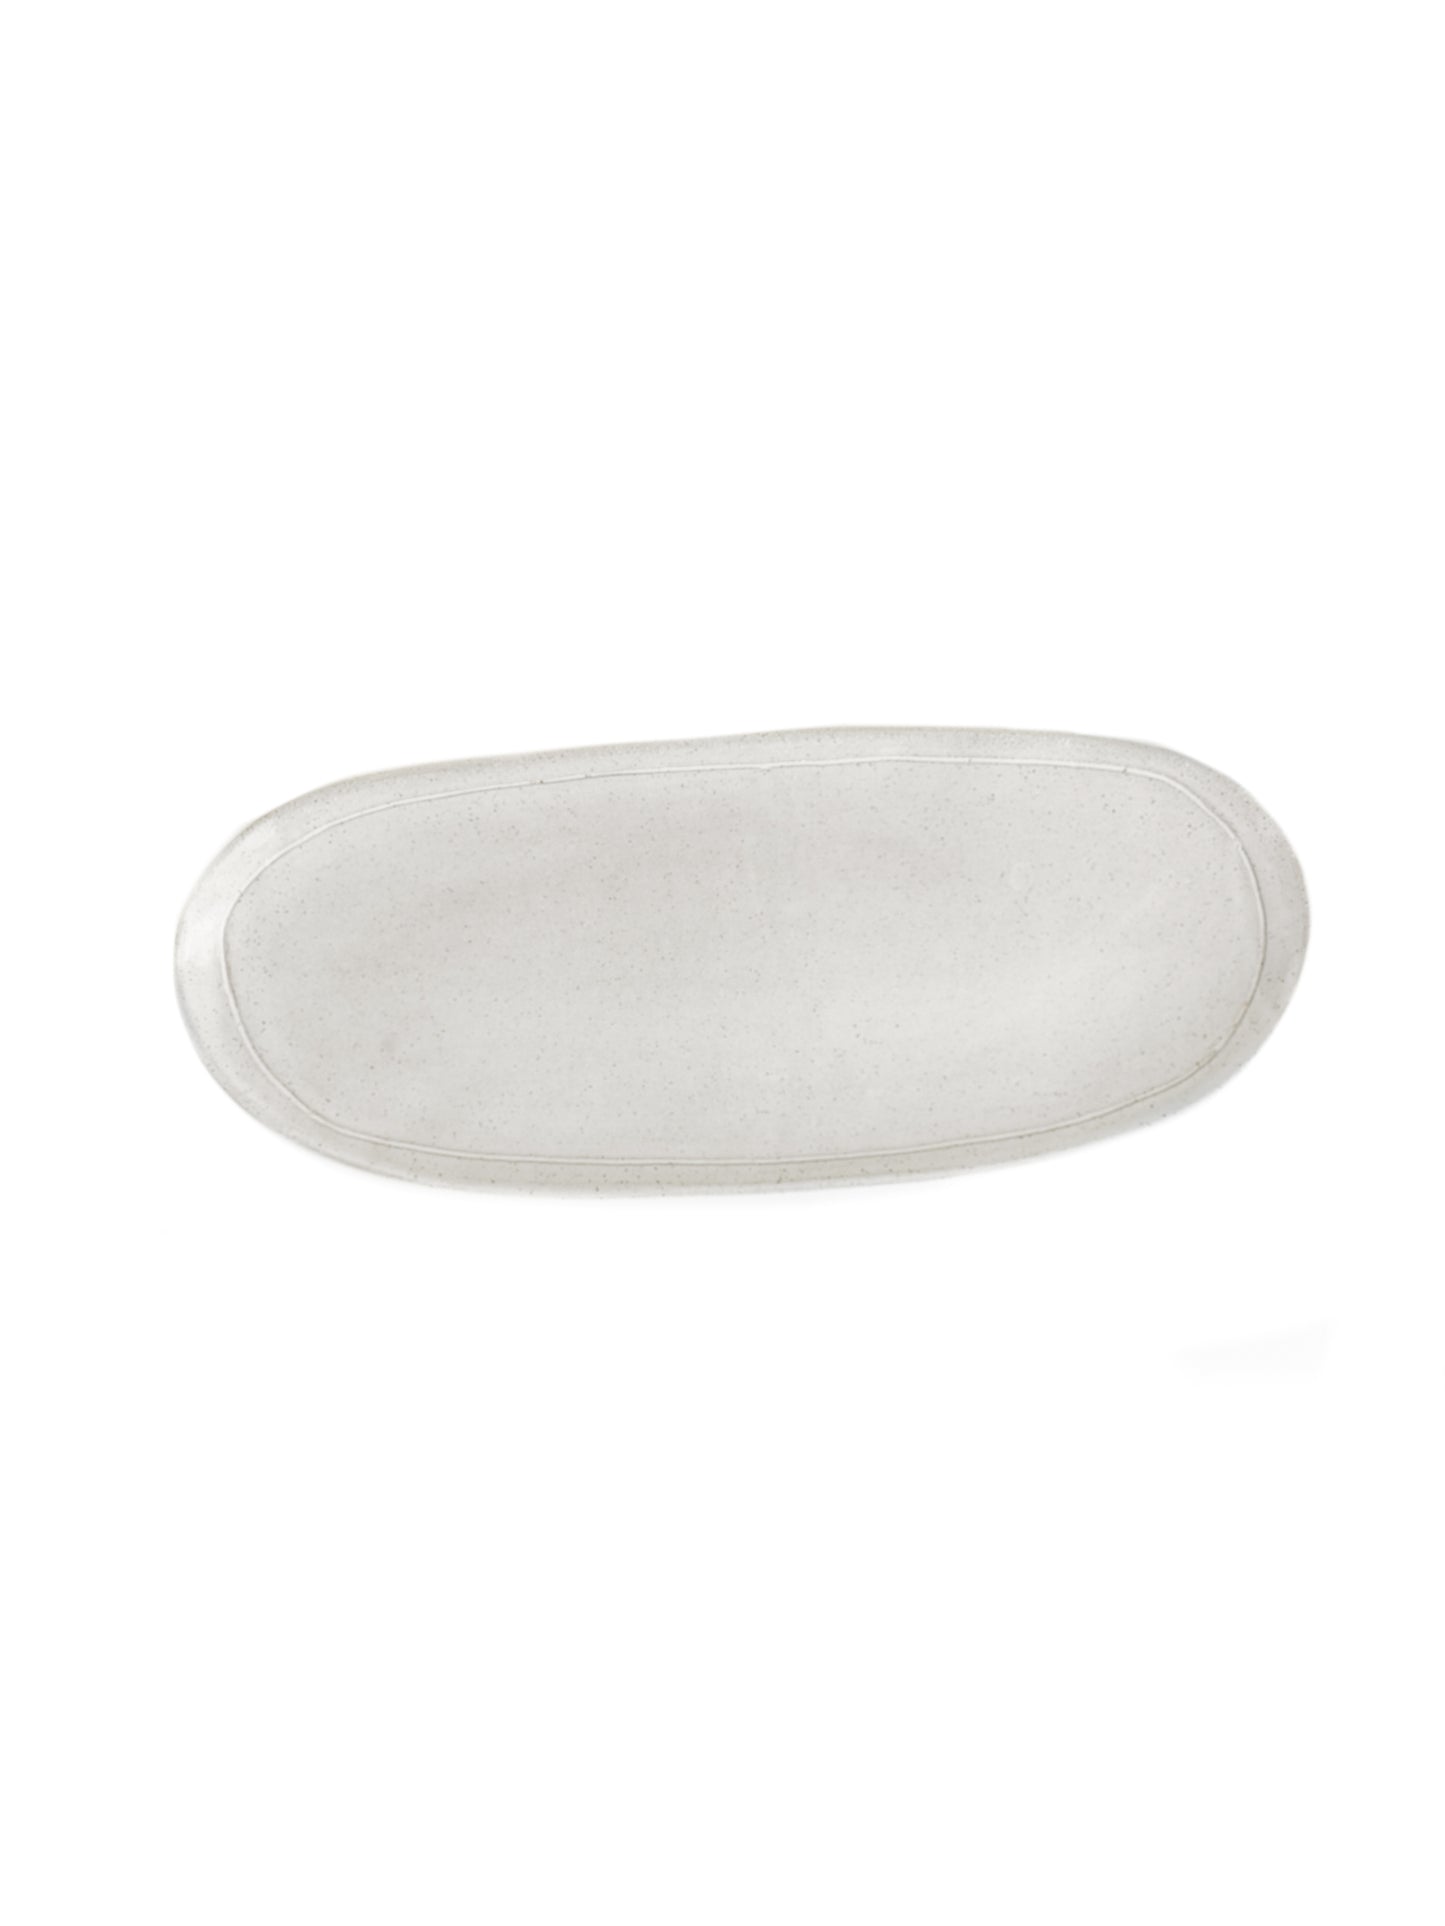 Shop the McQueen Pottery Speckled Charcuterie Platter at Weston Table